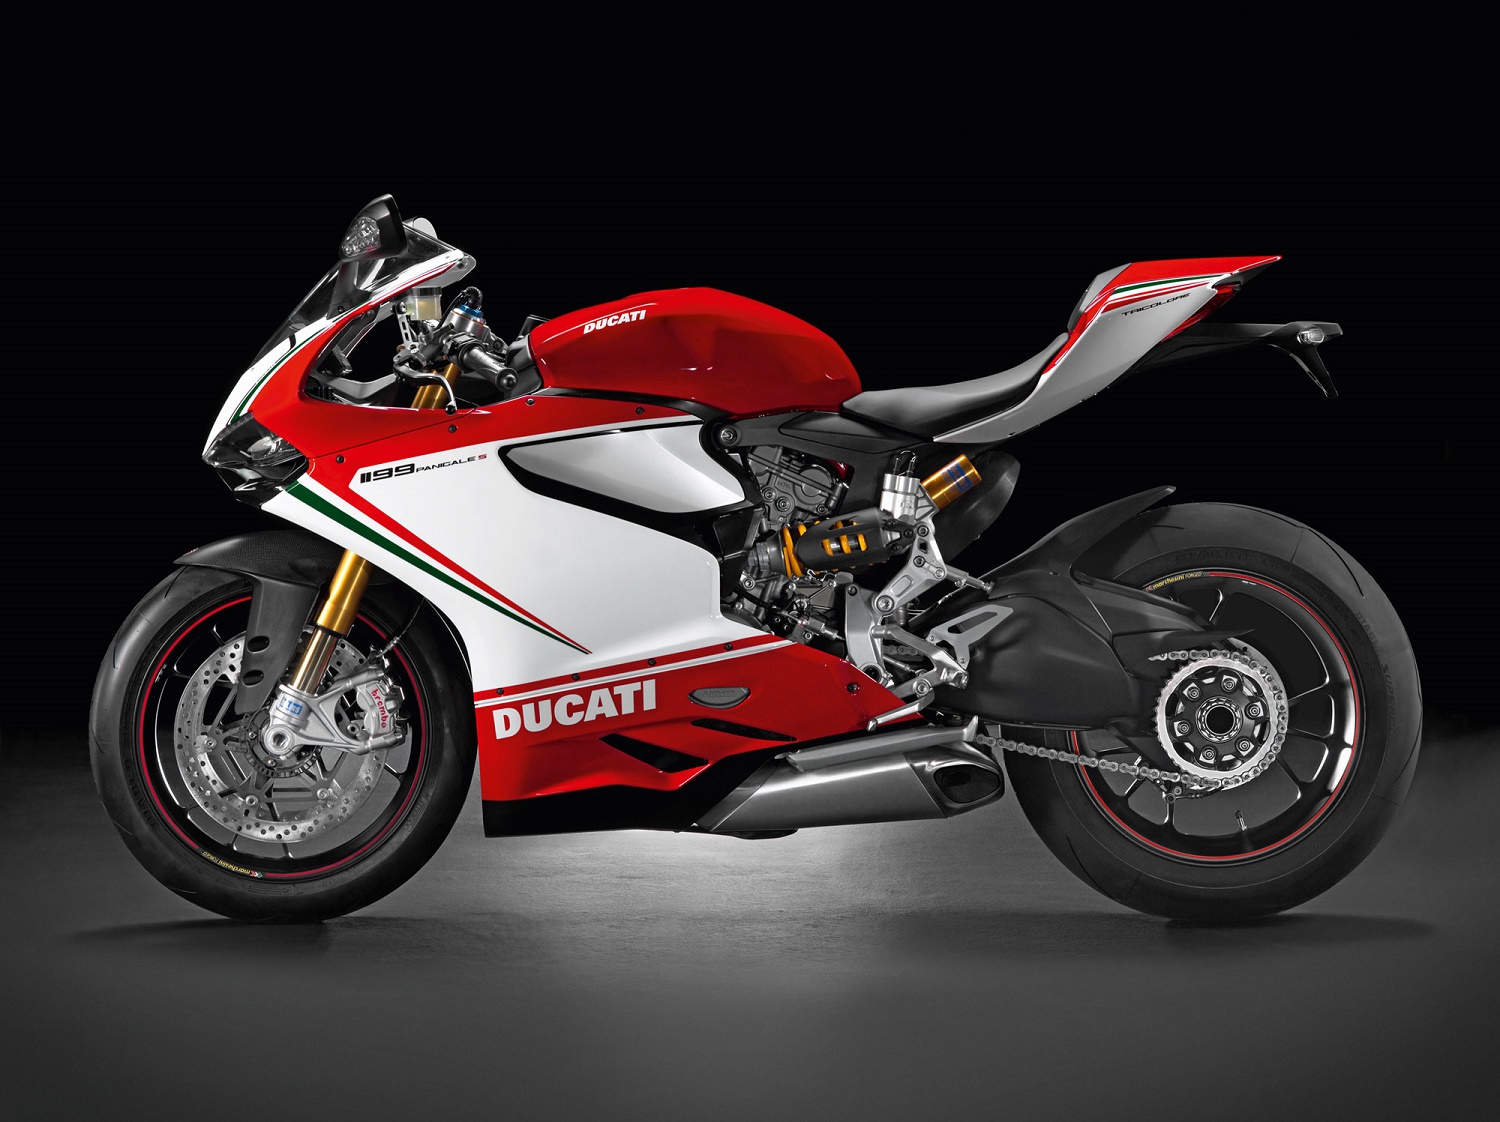 Ducati 1199 Panigale S 2012 Motorcycle review, full